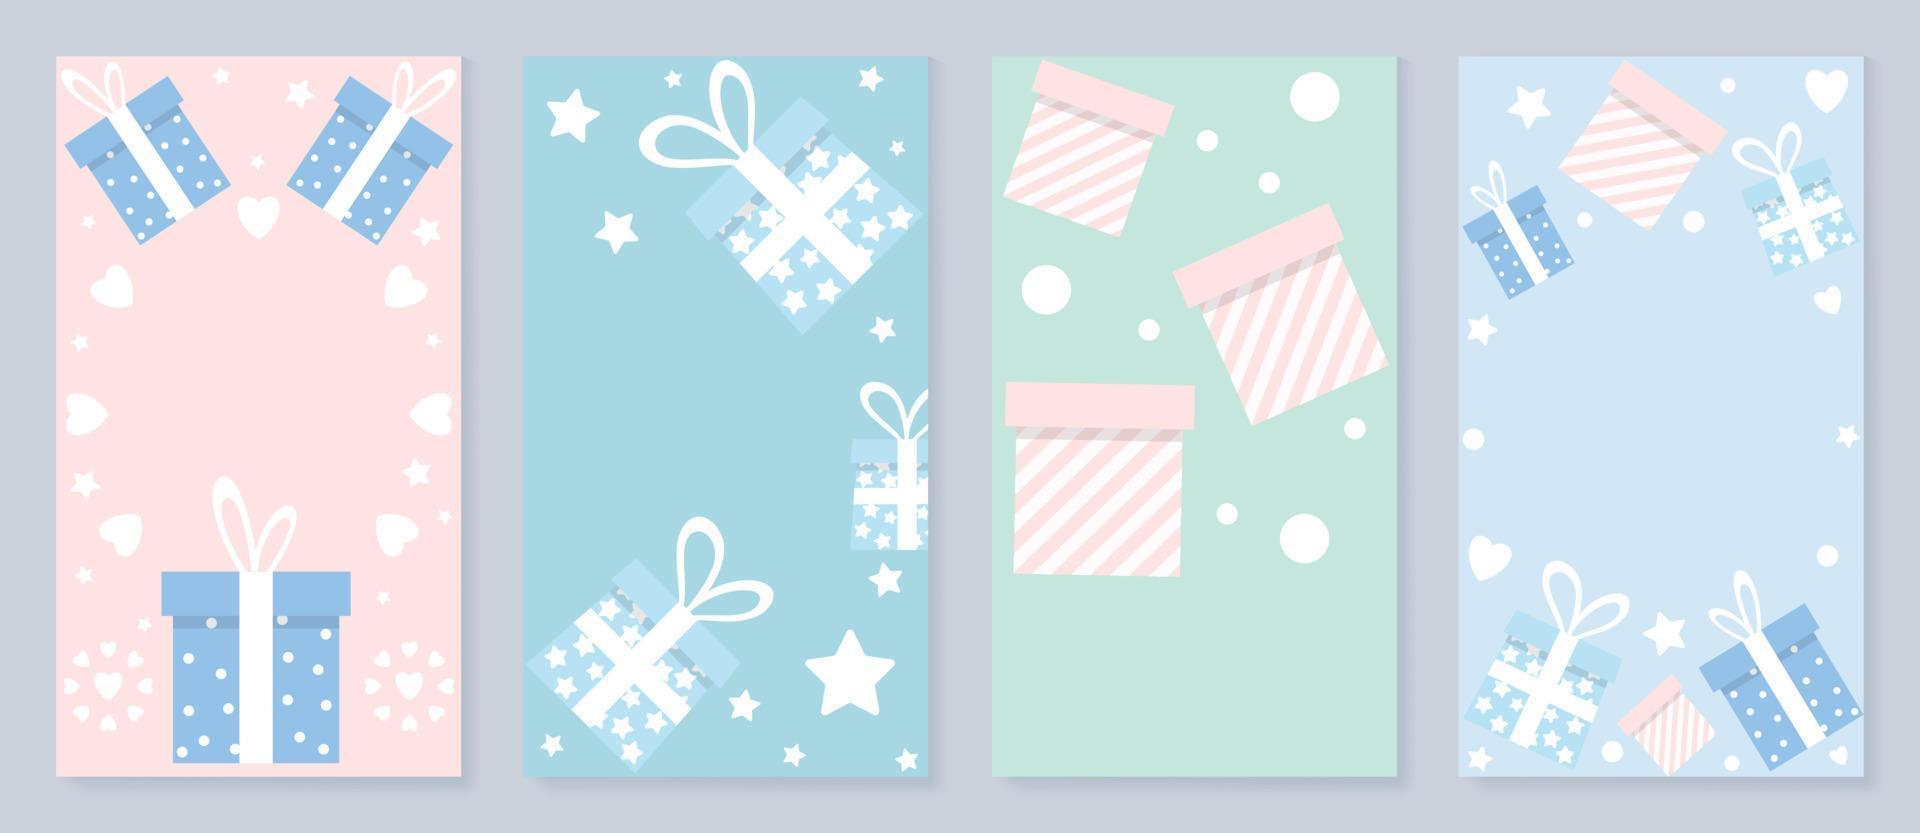 Set of christmas winter template poster. Pastel color christmas element cover, snow, presents, gift boxes, heart, stars. Design illustration for banner, card, social media, advertising, website. vector